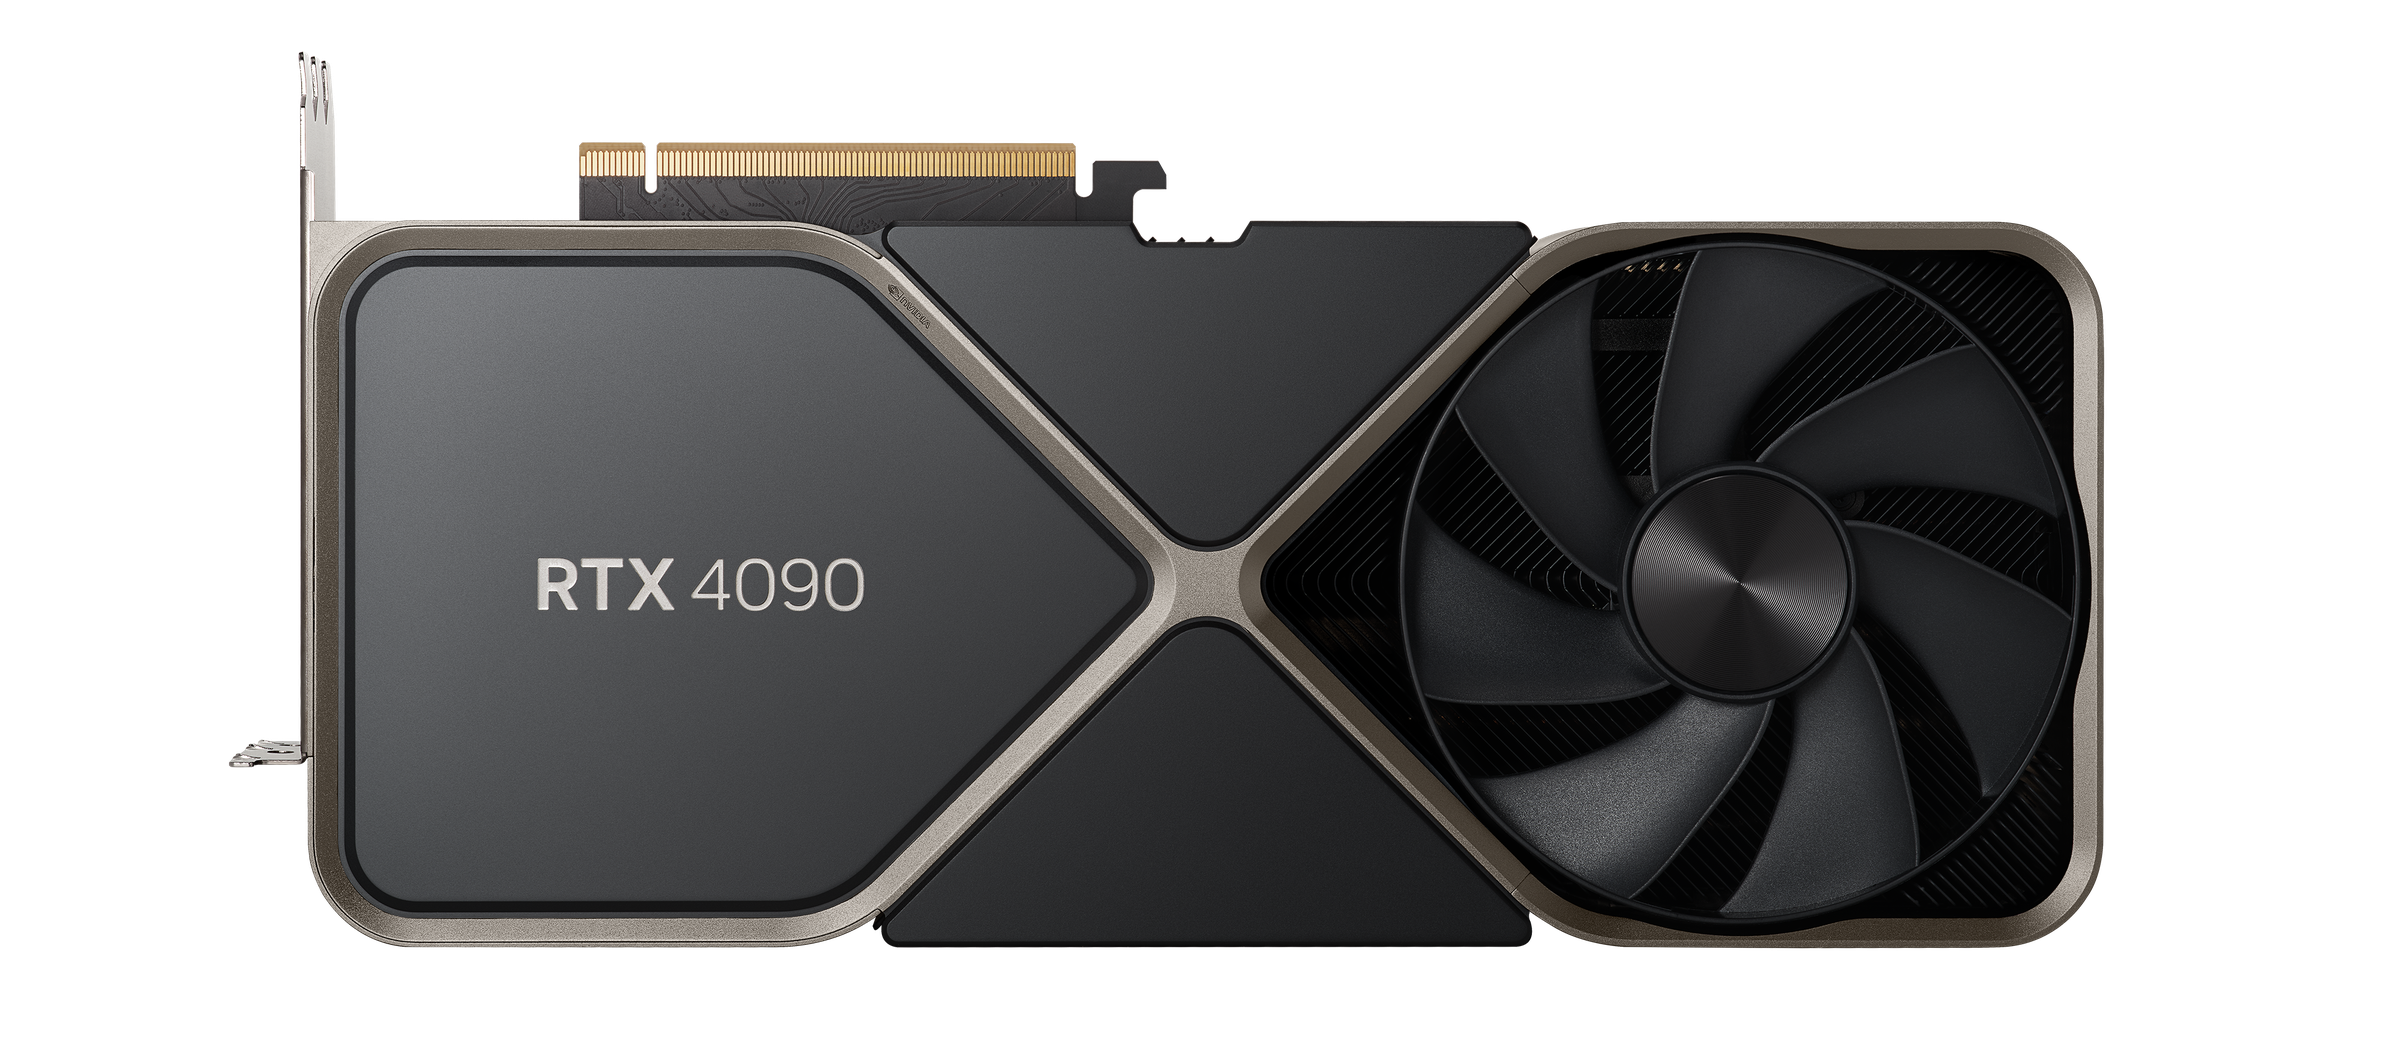 Nvidia has upgraded the design on its RTX 40-series Founders Edition cards